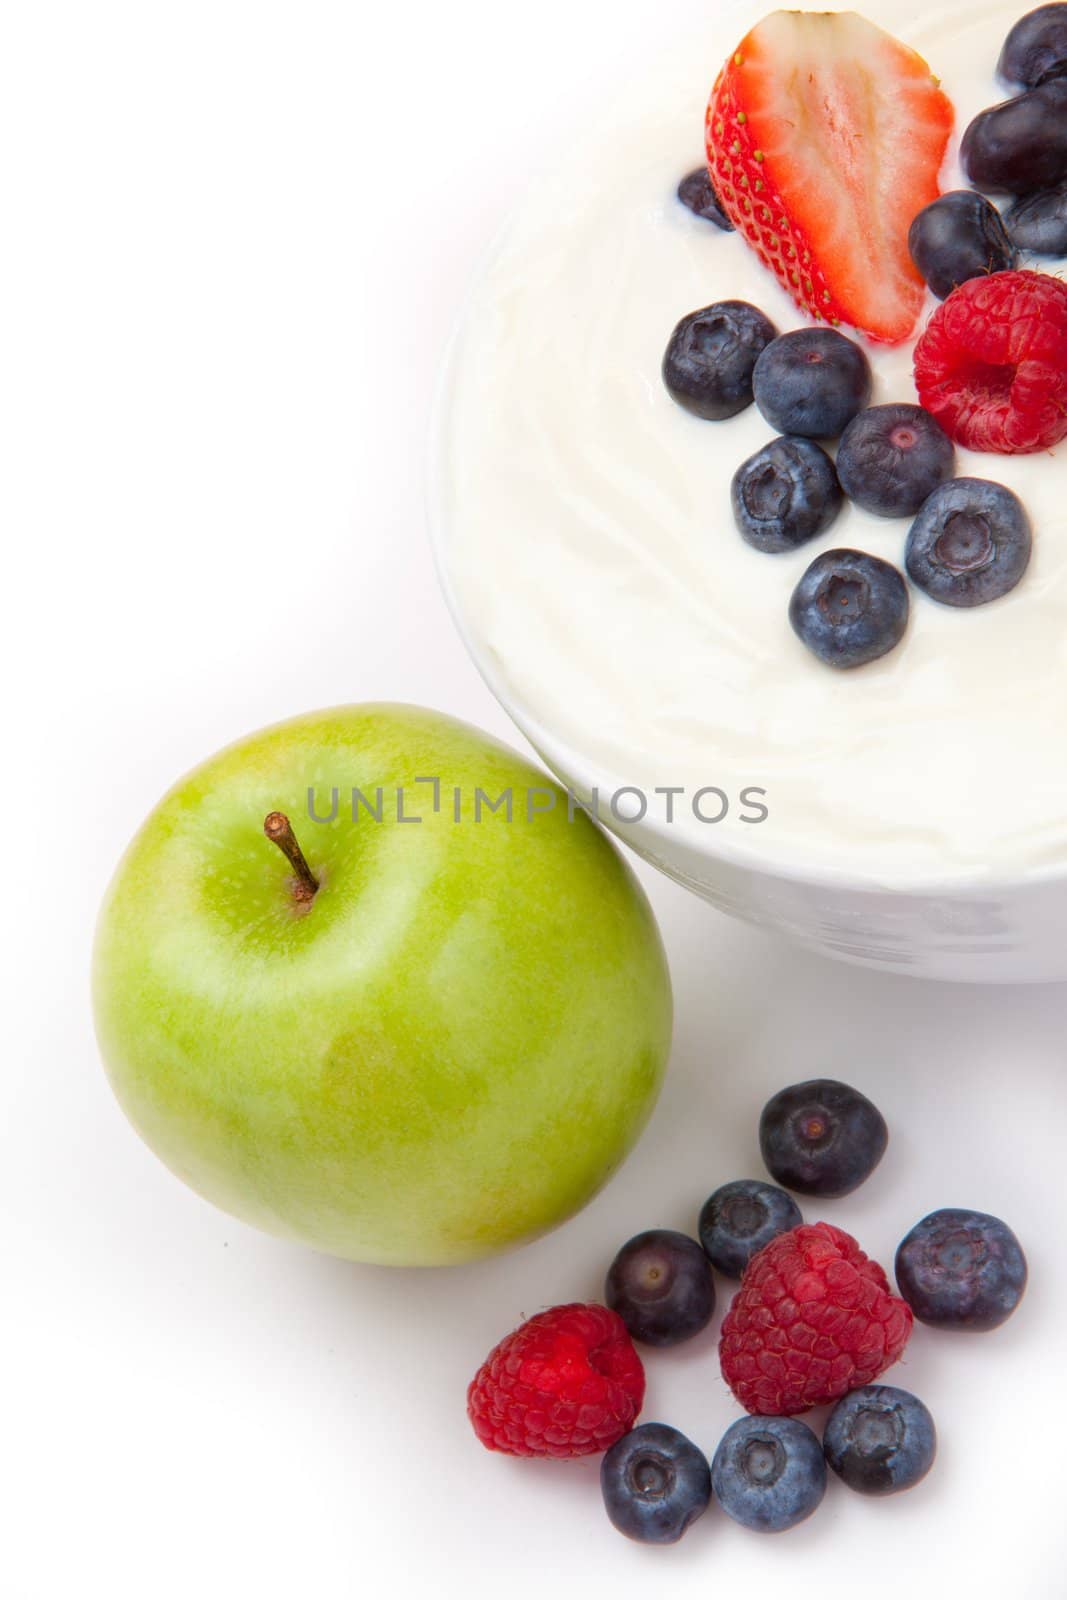 Berries cream and apple  against a white background